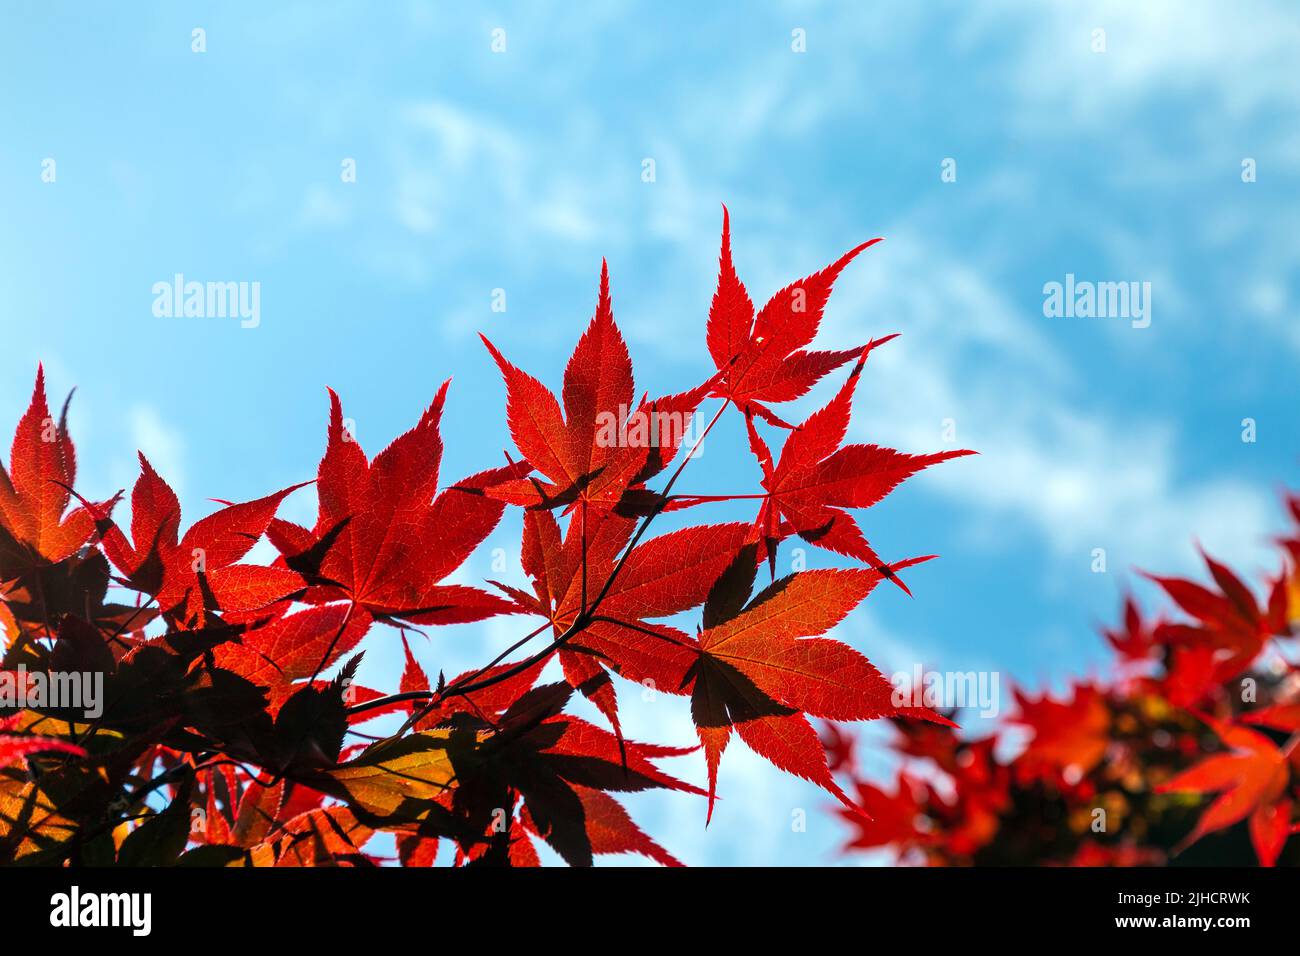 Leaves of a red maple tree against blue sky (West Ham Park, Newham, London, UK) Stock Photo